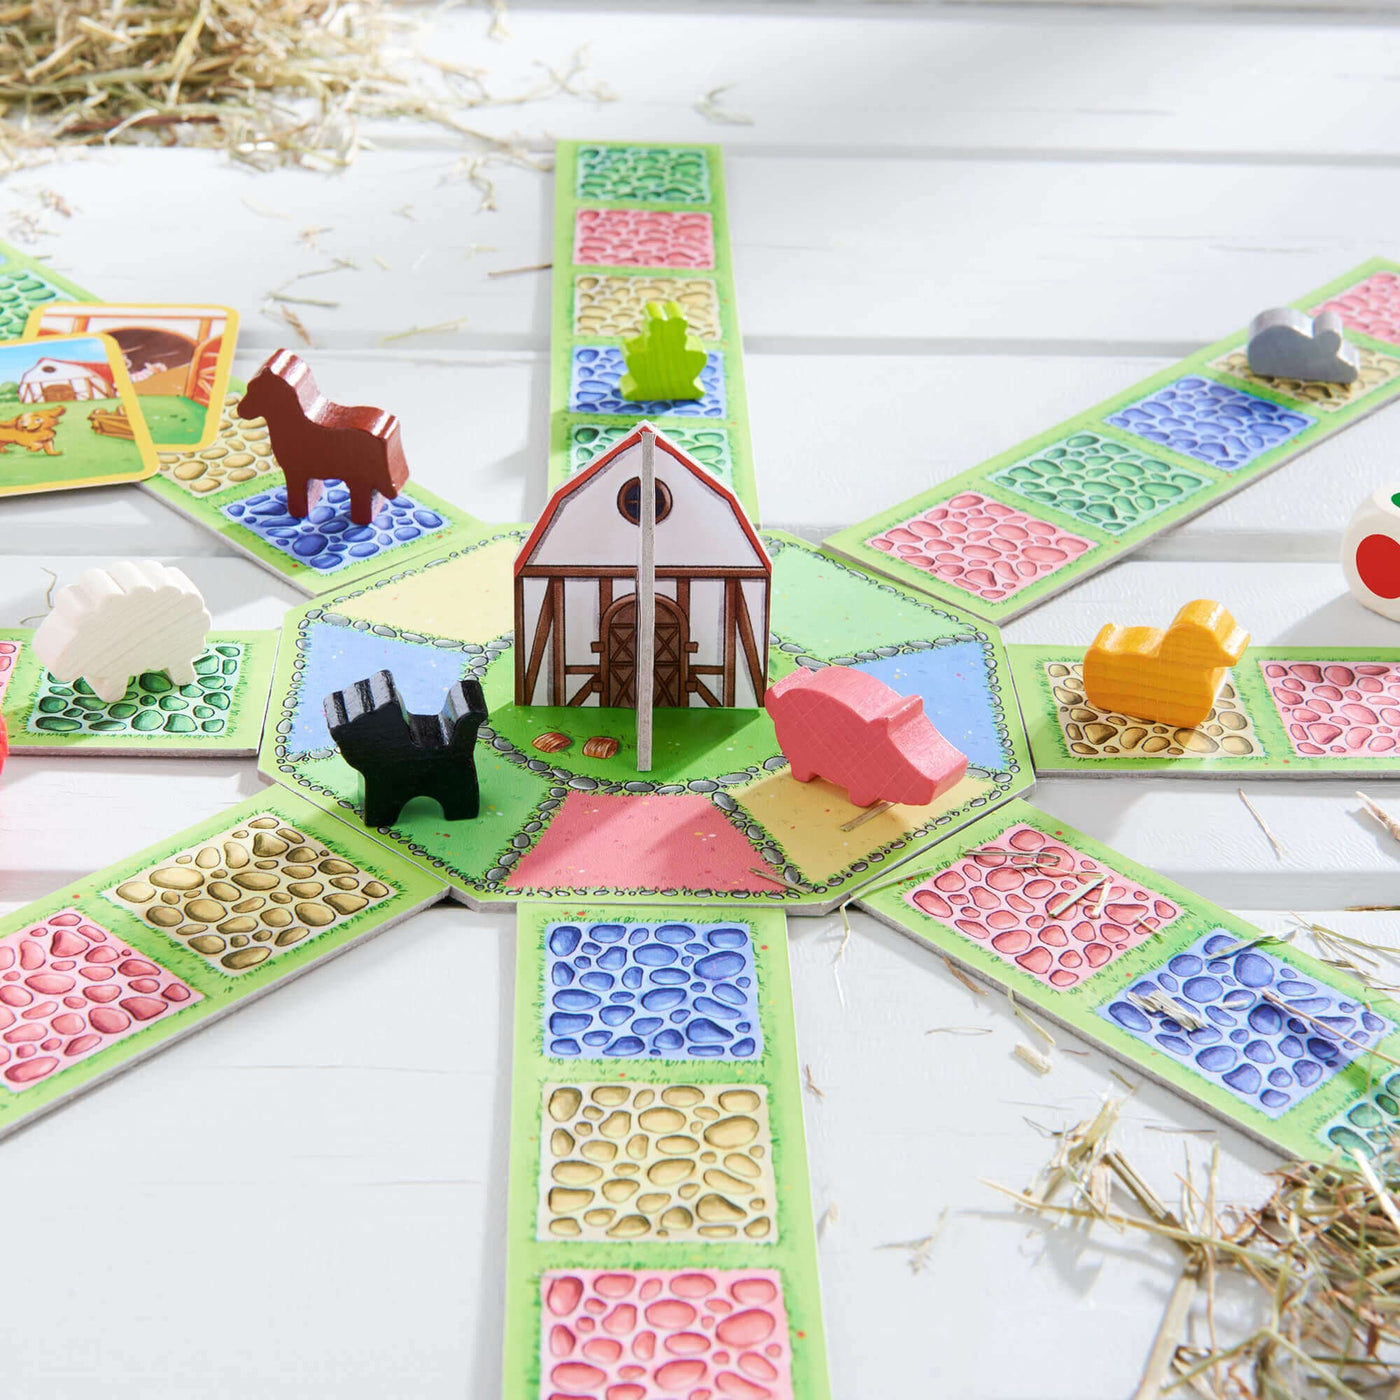 Barnyard Bunch game by HABA with barn and wooden pieces on wood floor